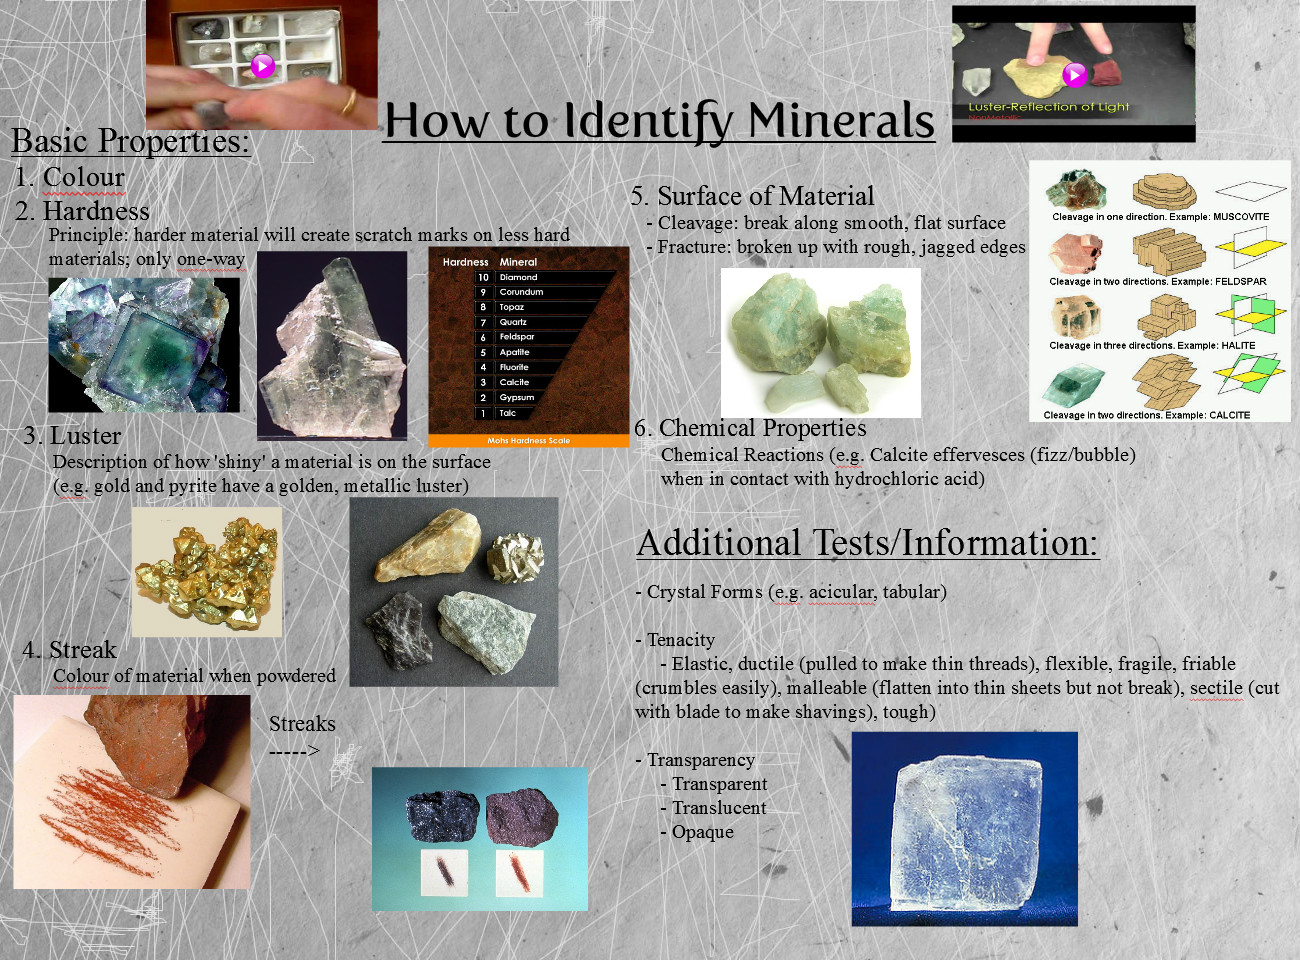 How Do Geologists Identify Minerals?